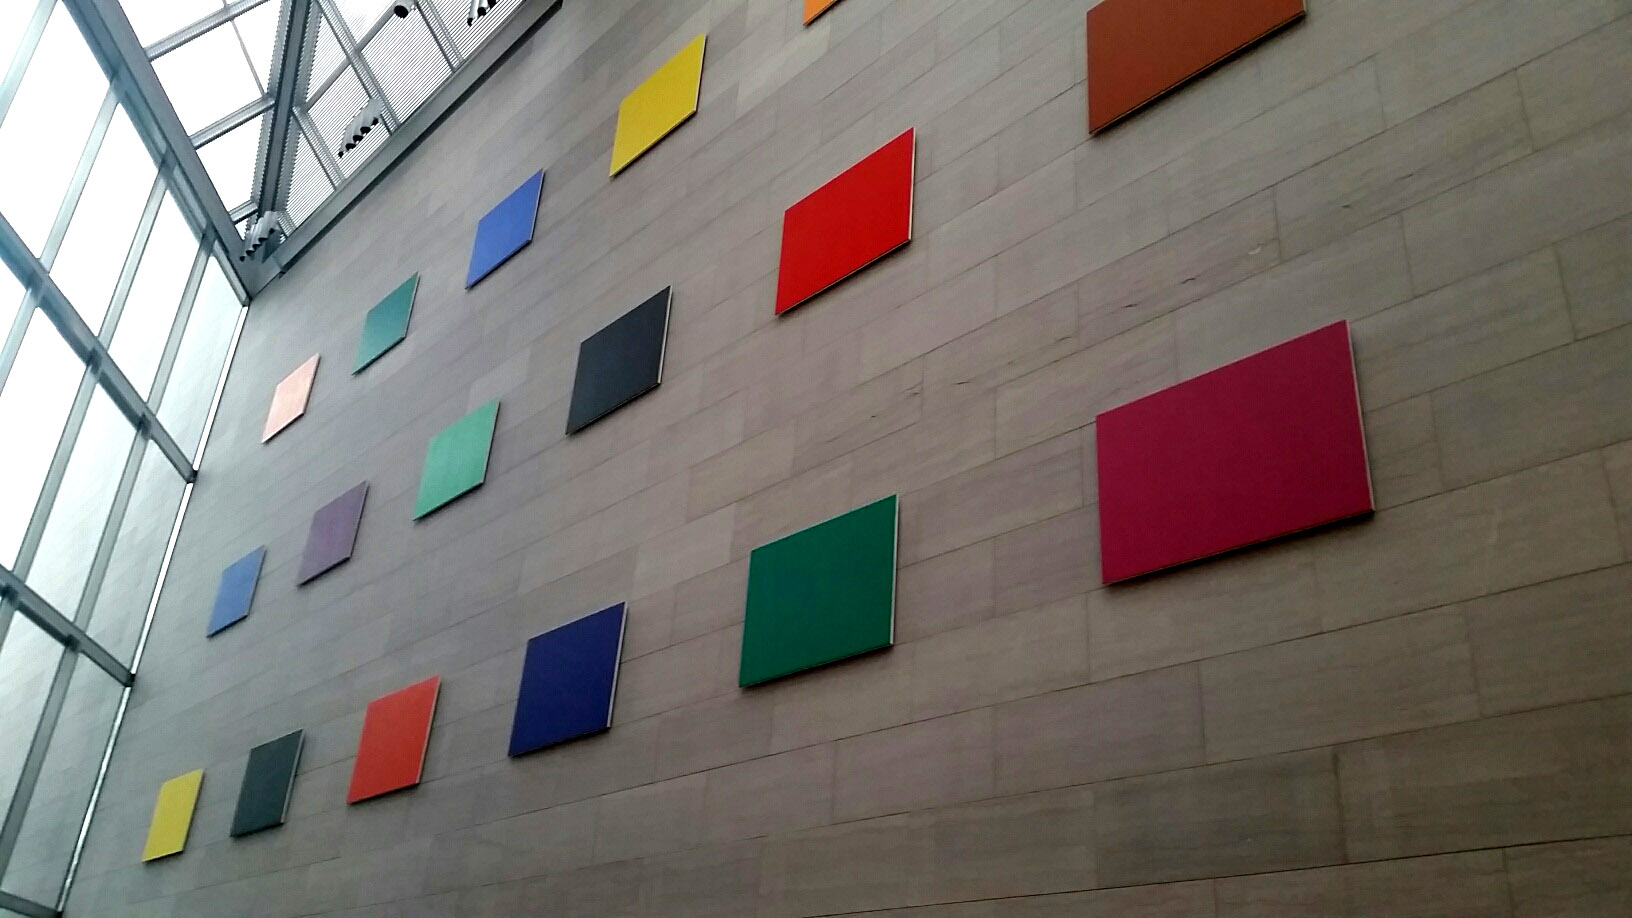 Wall panels by Ellsworth Kelly, an American painter, sculptor and printmaker, hang in the East Building of the National Gallery of Art. They were originally displayed in a bank. (WTOP/Kathy Stewart)